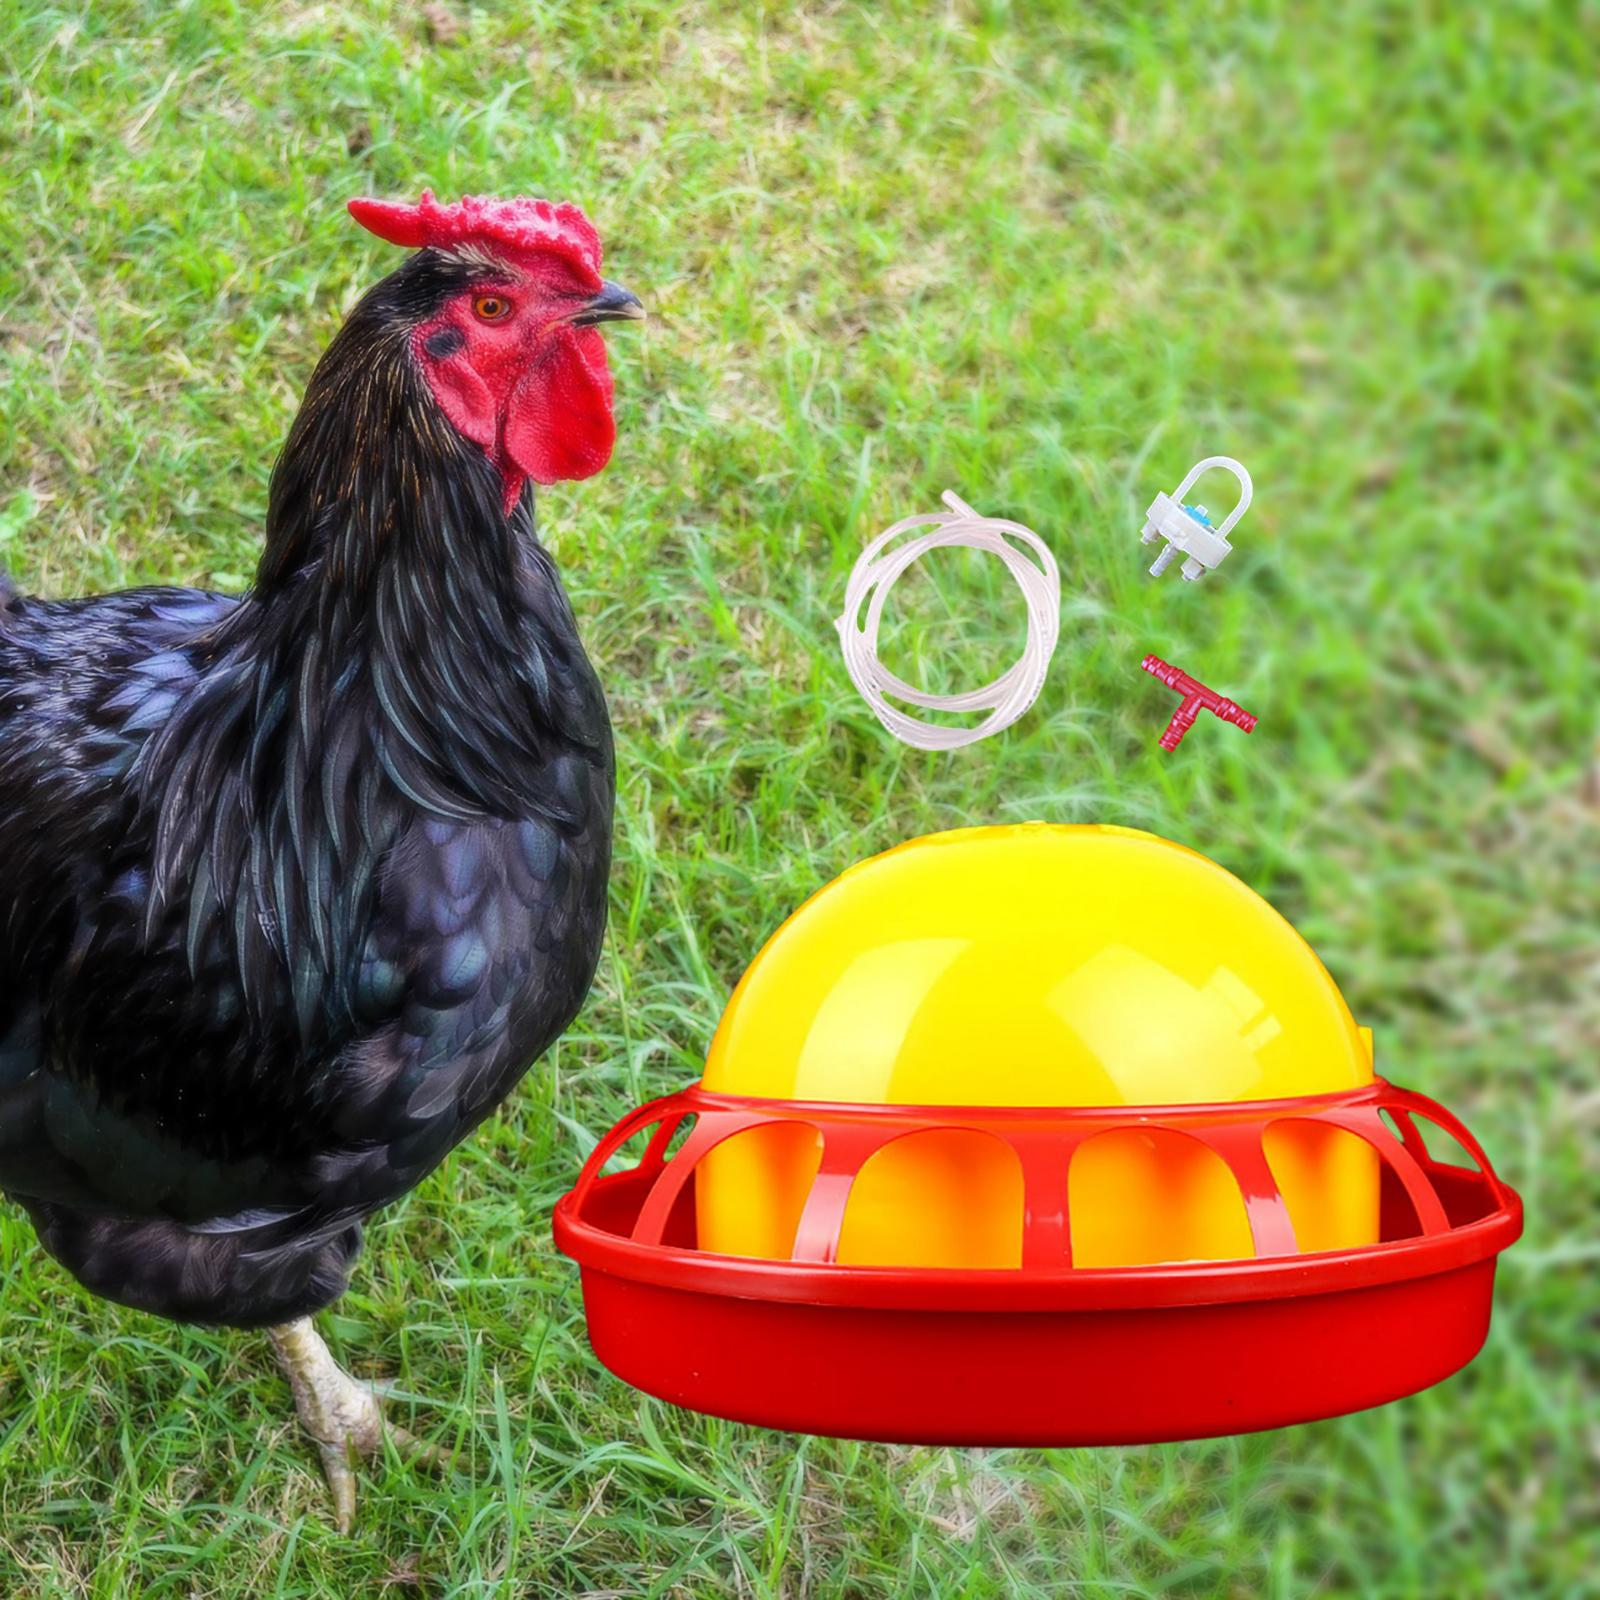 Automatic Chicken Waterer Chick Hen Poultry Farming Drinkers Set 22x12x3.5cm